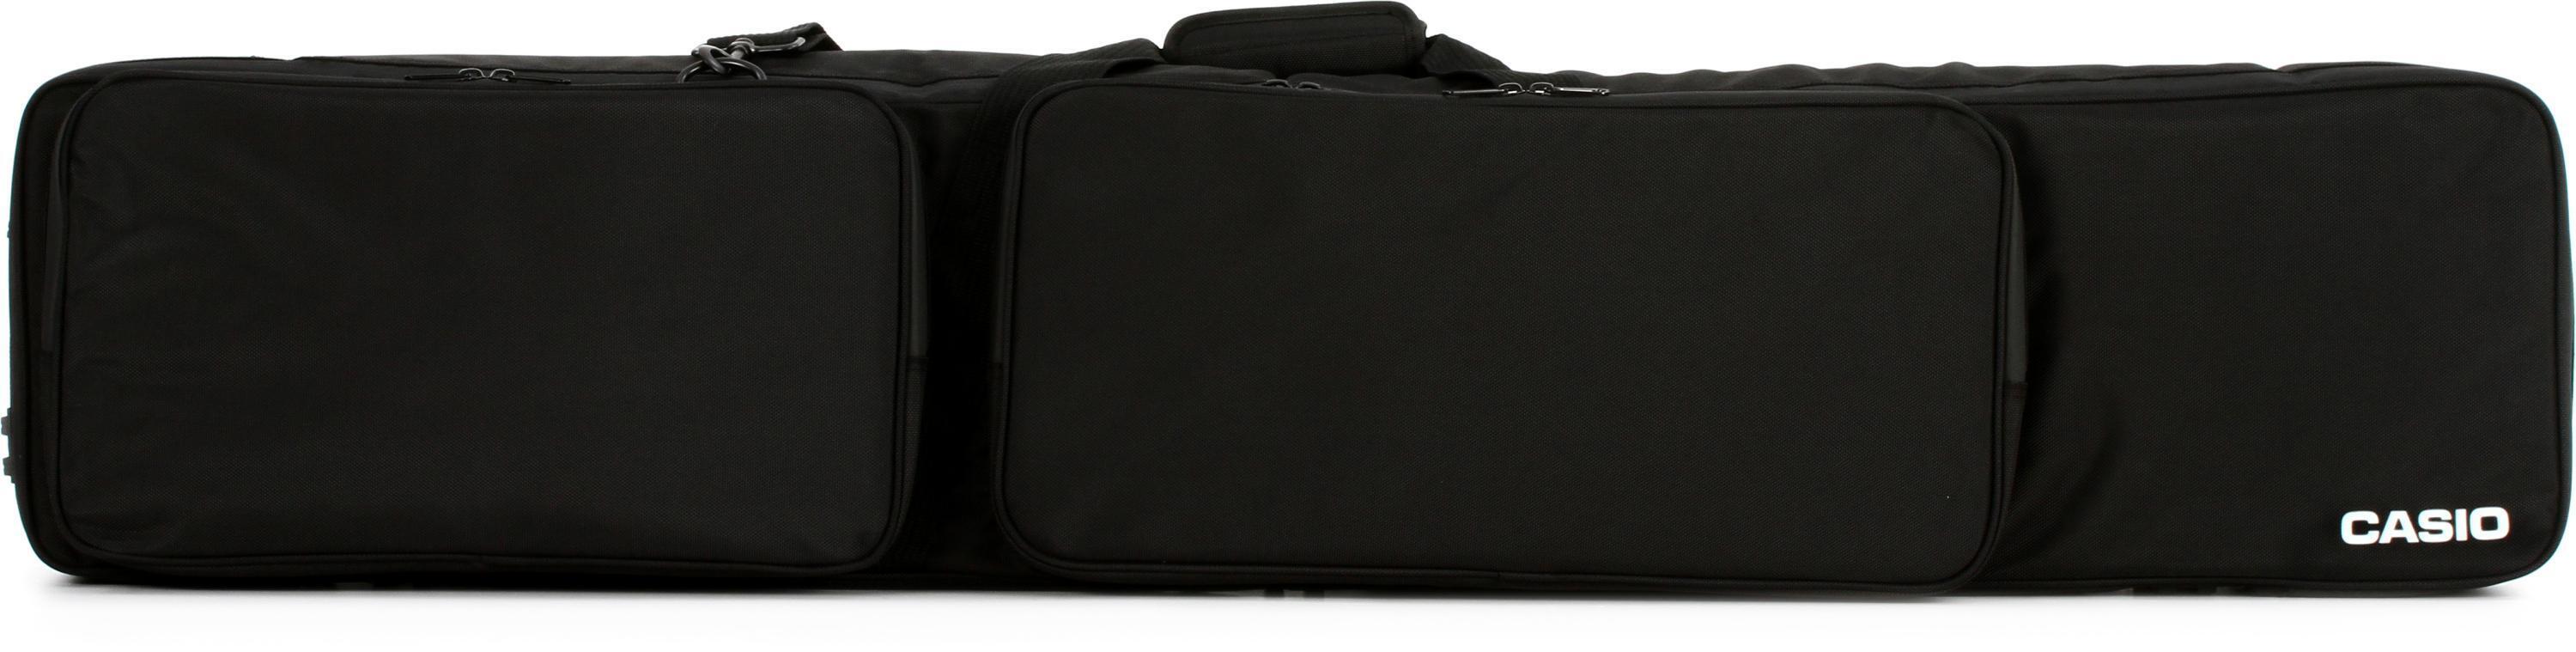 Casio Carry Digital PXand Case | CDP Pianos For Sweetwater 